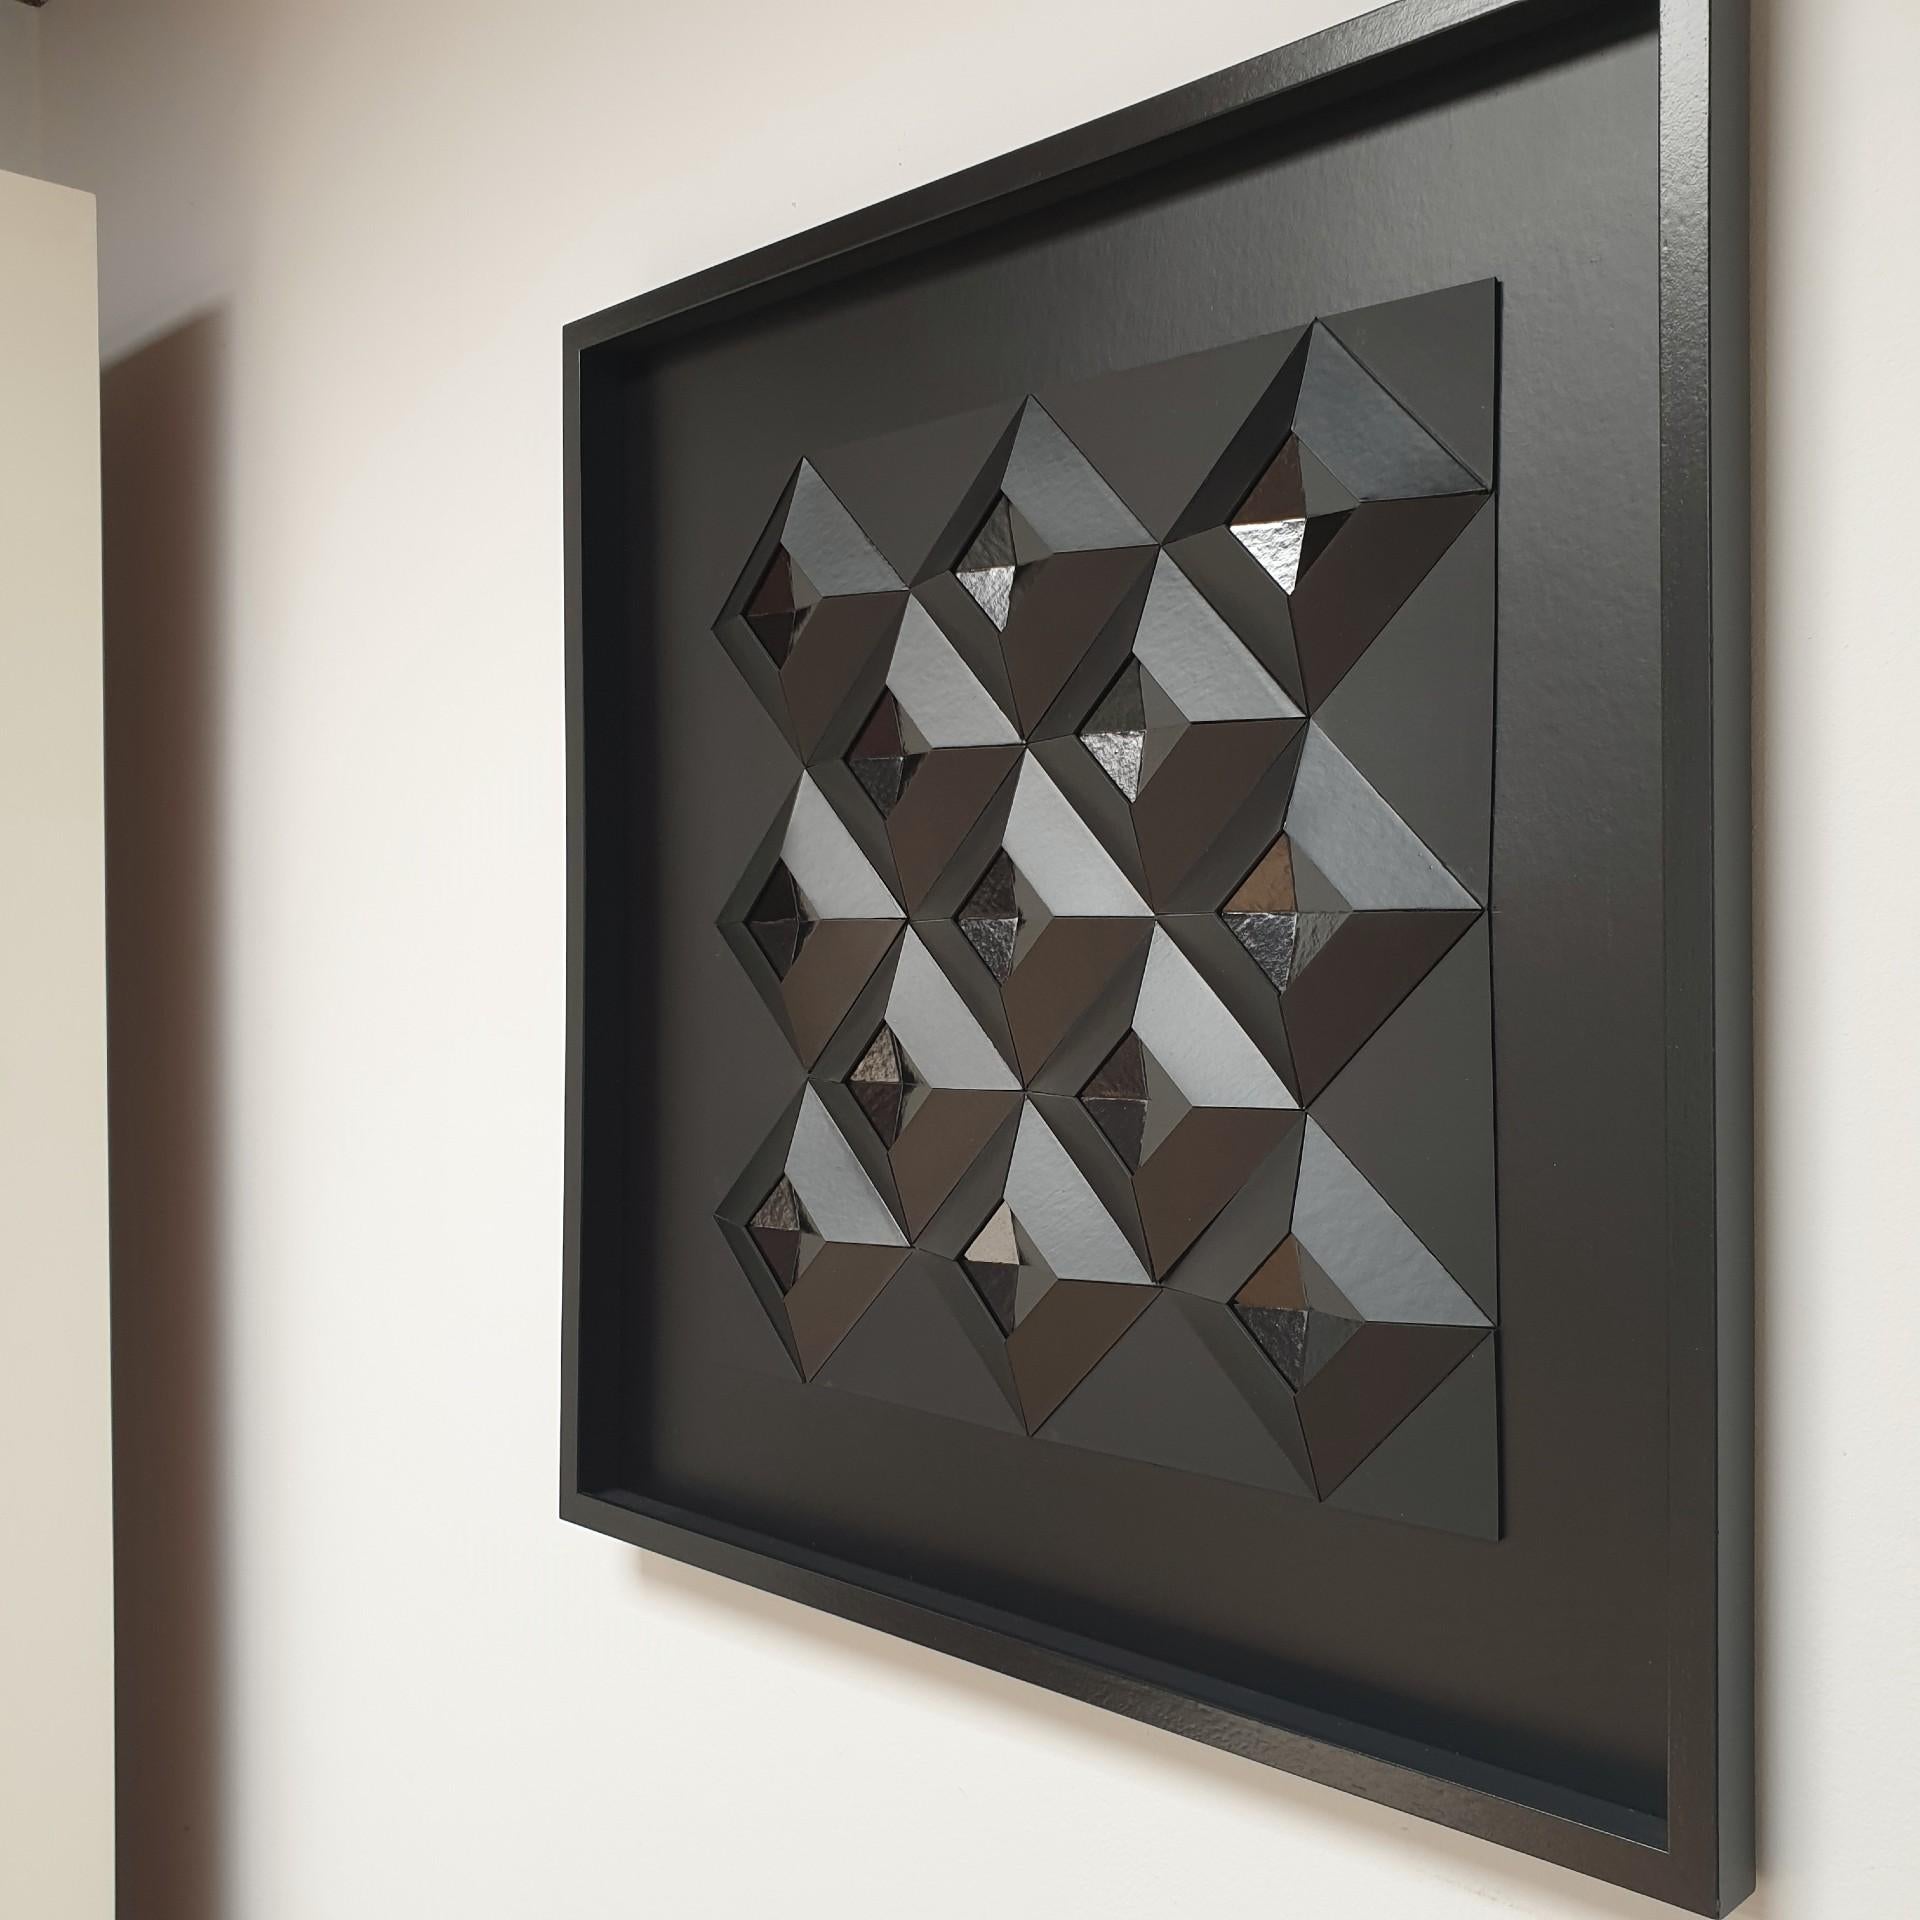 Diamond shape variation no. 6 is a unique one-of-a-kind contemporary modern painting relief by Dutch artist Eef de Graaf. The relief is made from meticulously hand-cut plain black cardboard elements that are hand-mounted together forming thirteen